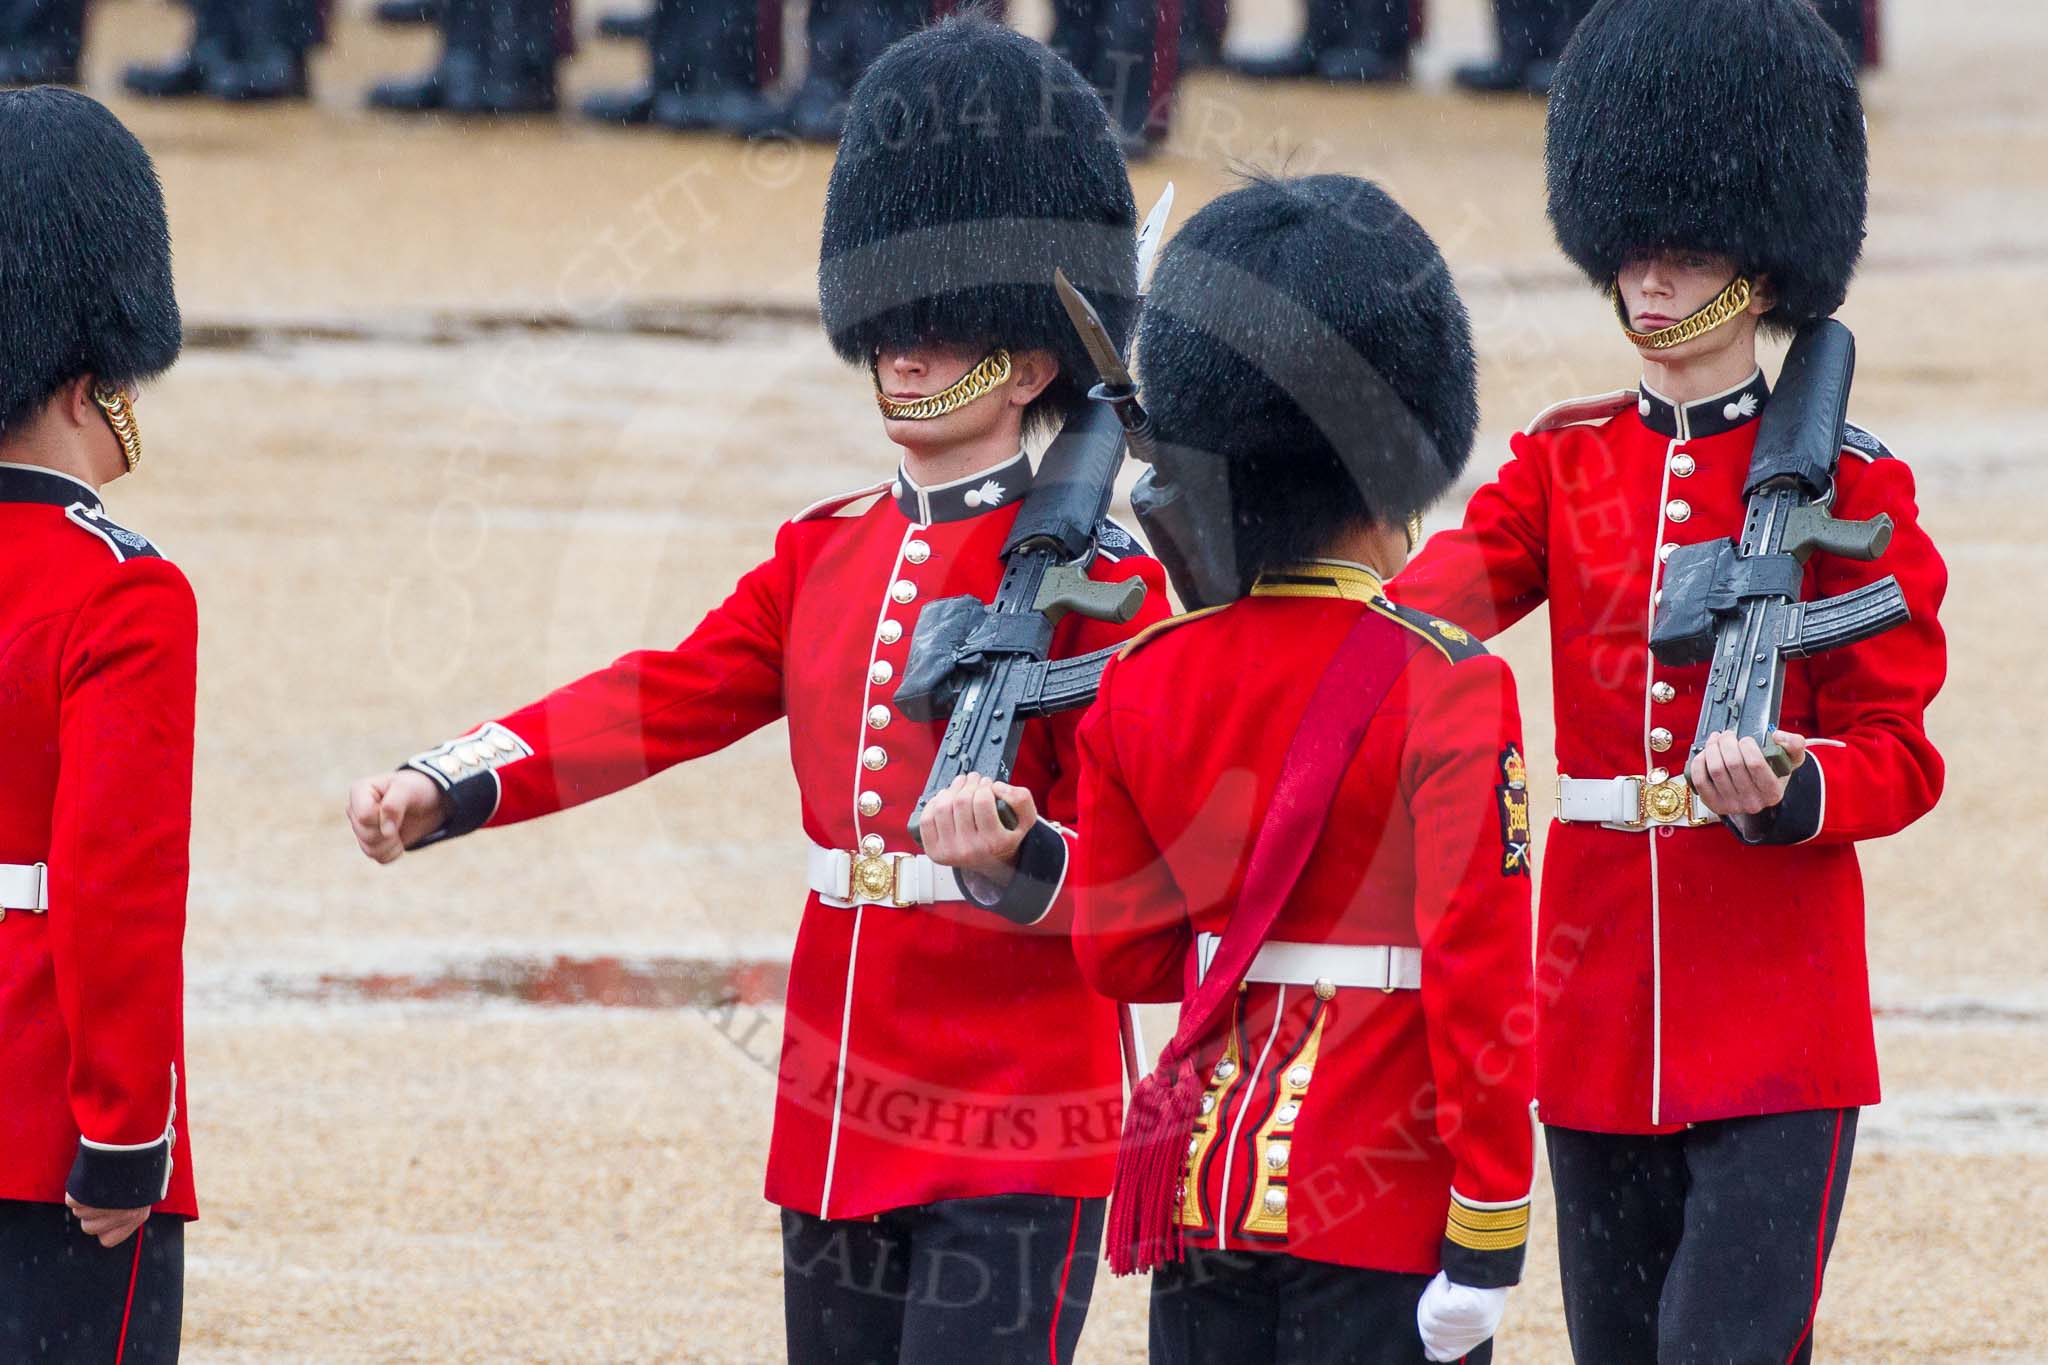 The Colonel's Review 2014.
Horse Guards Parade, Westminster,
London,

United Kingdom,
on 07 June 2014 at 11:20, image #409